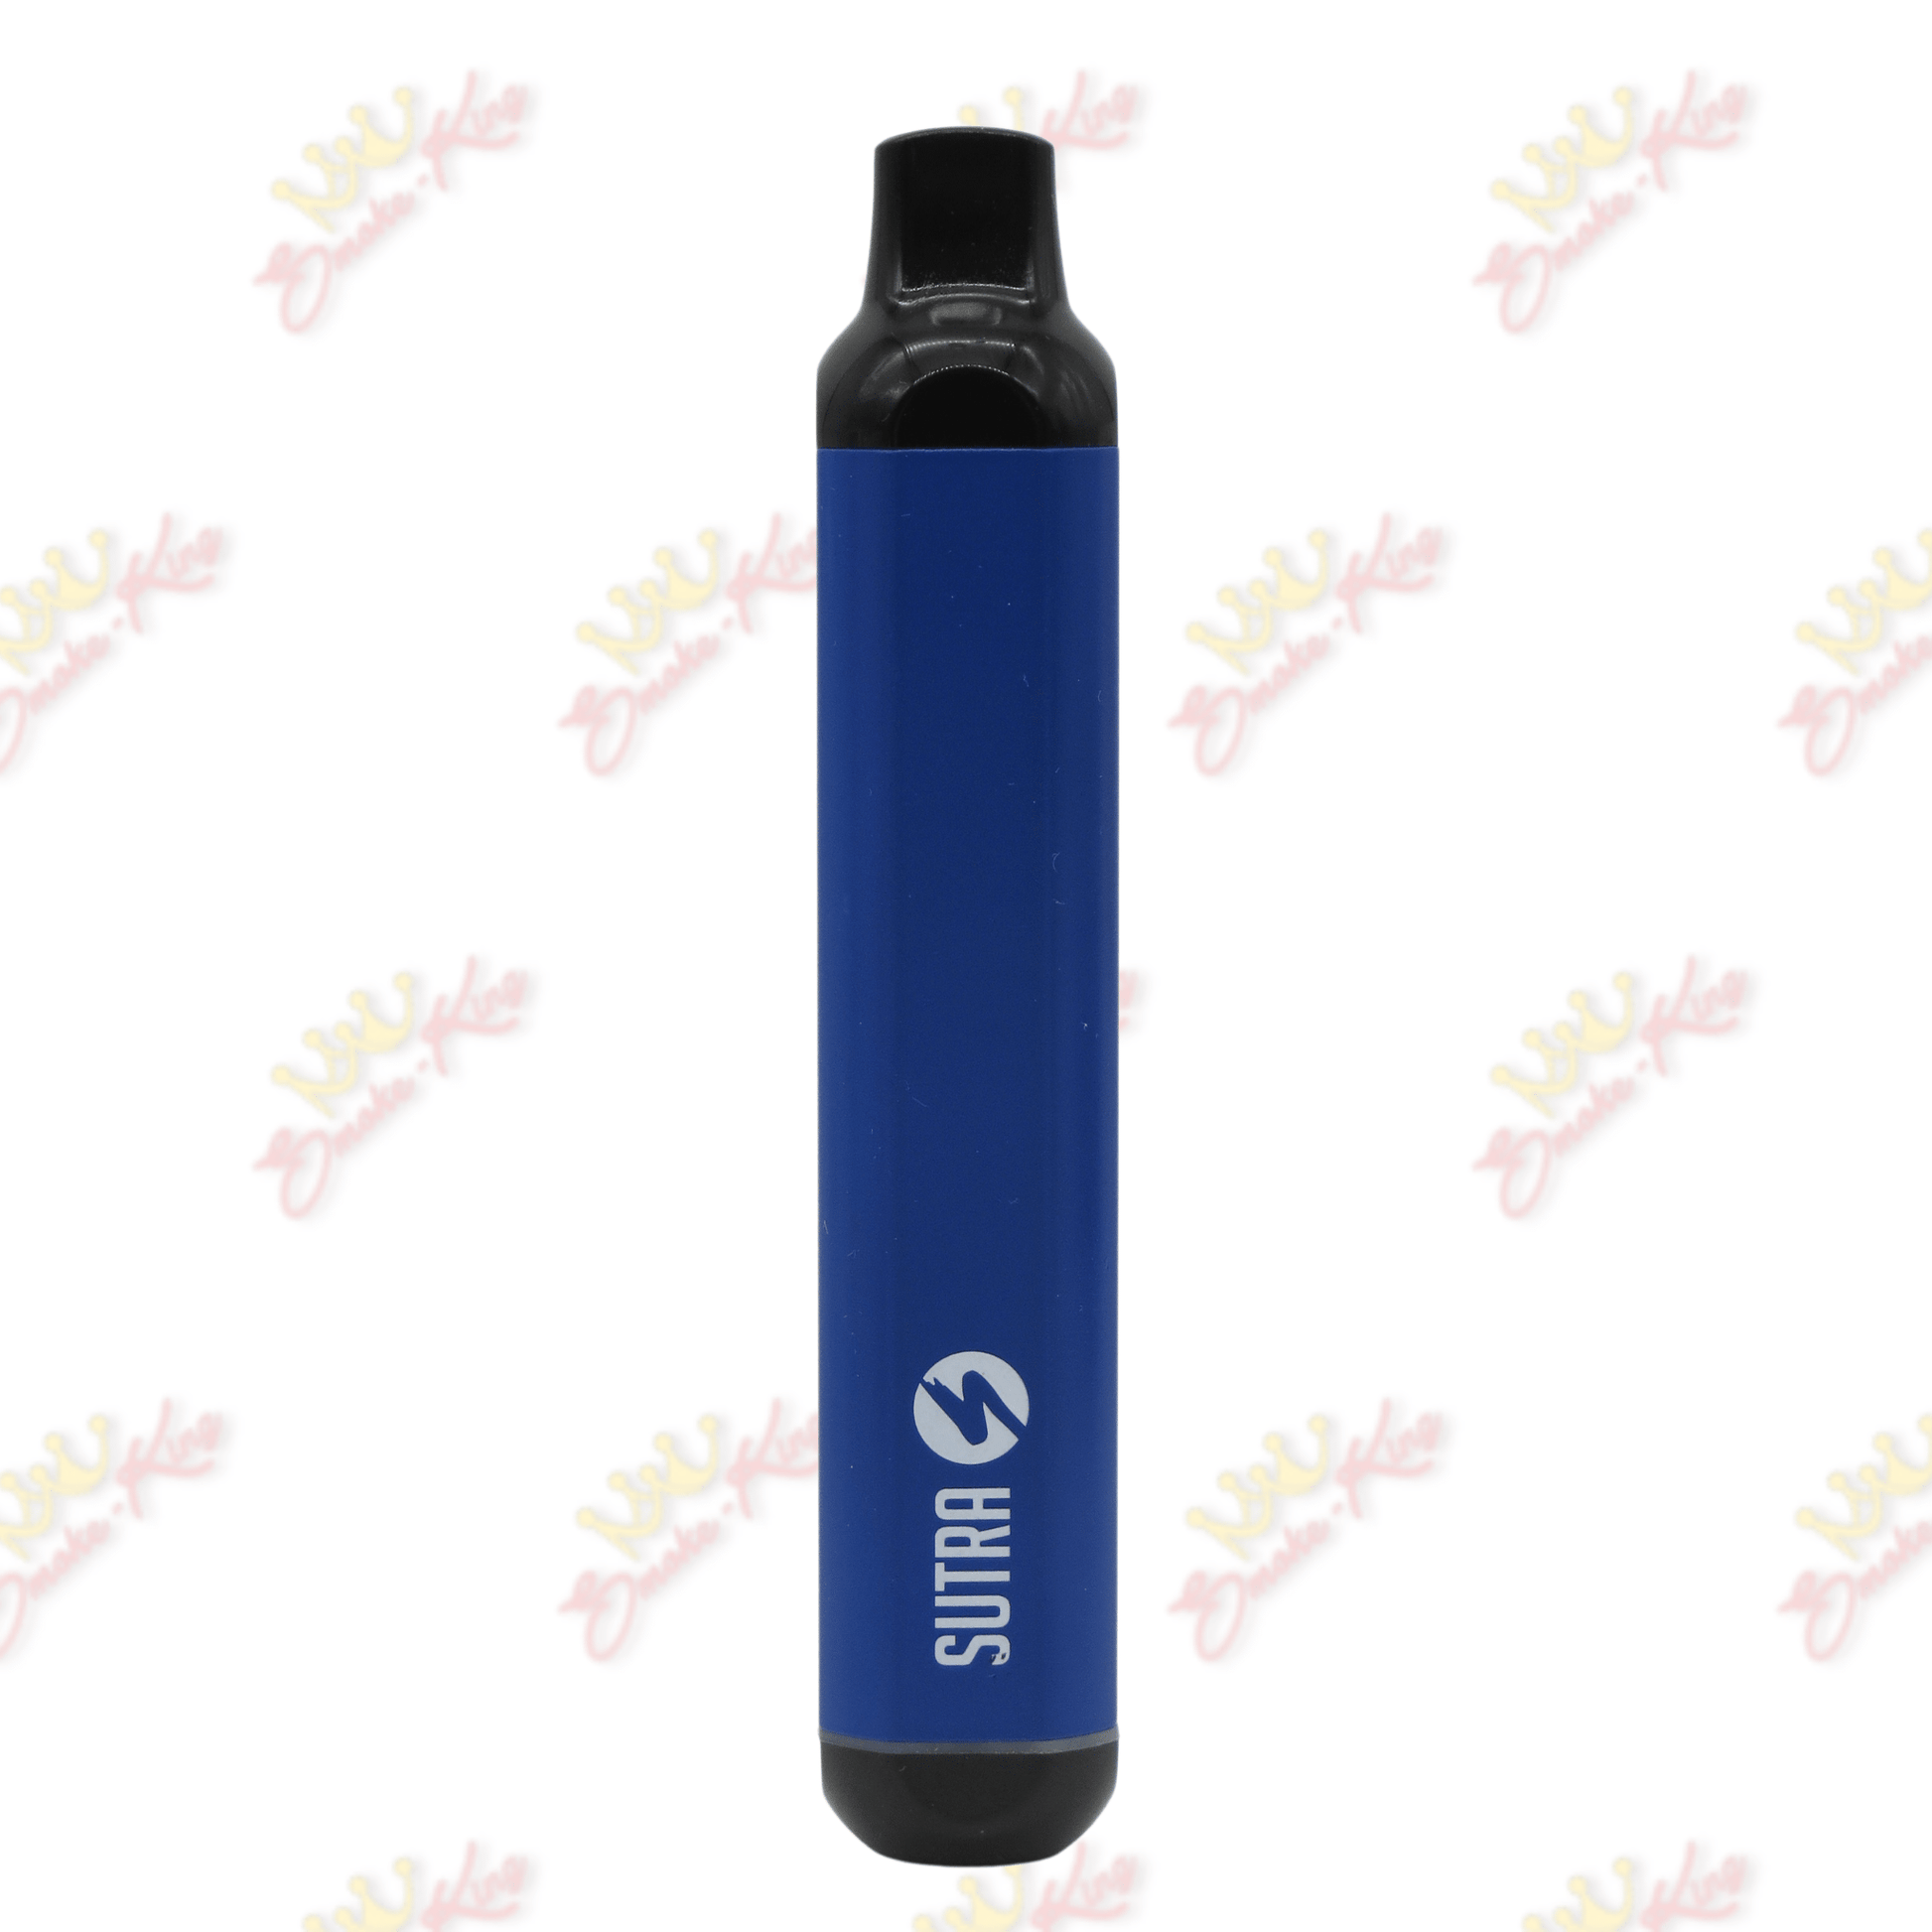 Sutra Blue Sutra Silo Discreet Battery Sutra Silo Discreet Battery | 510 Cartridge Battery | Smoke King